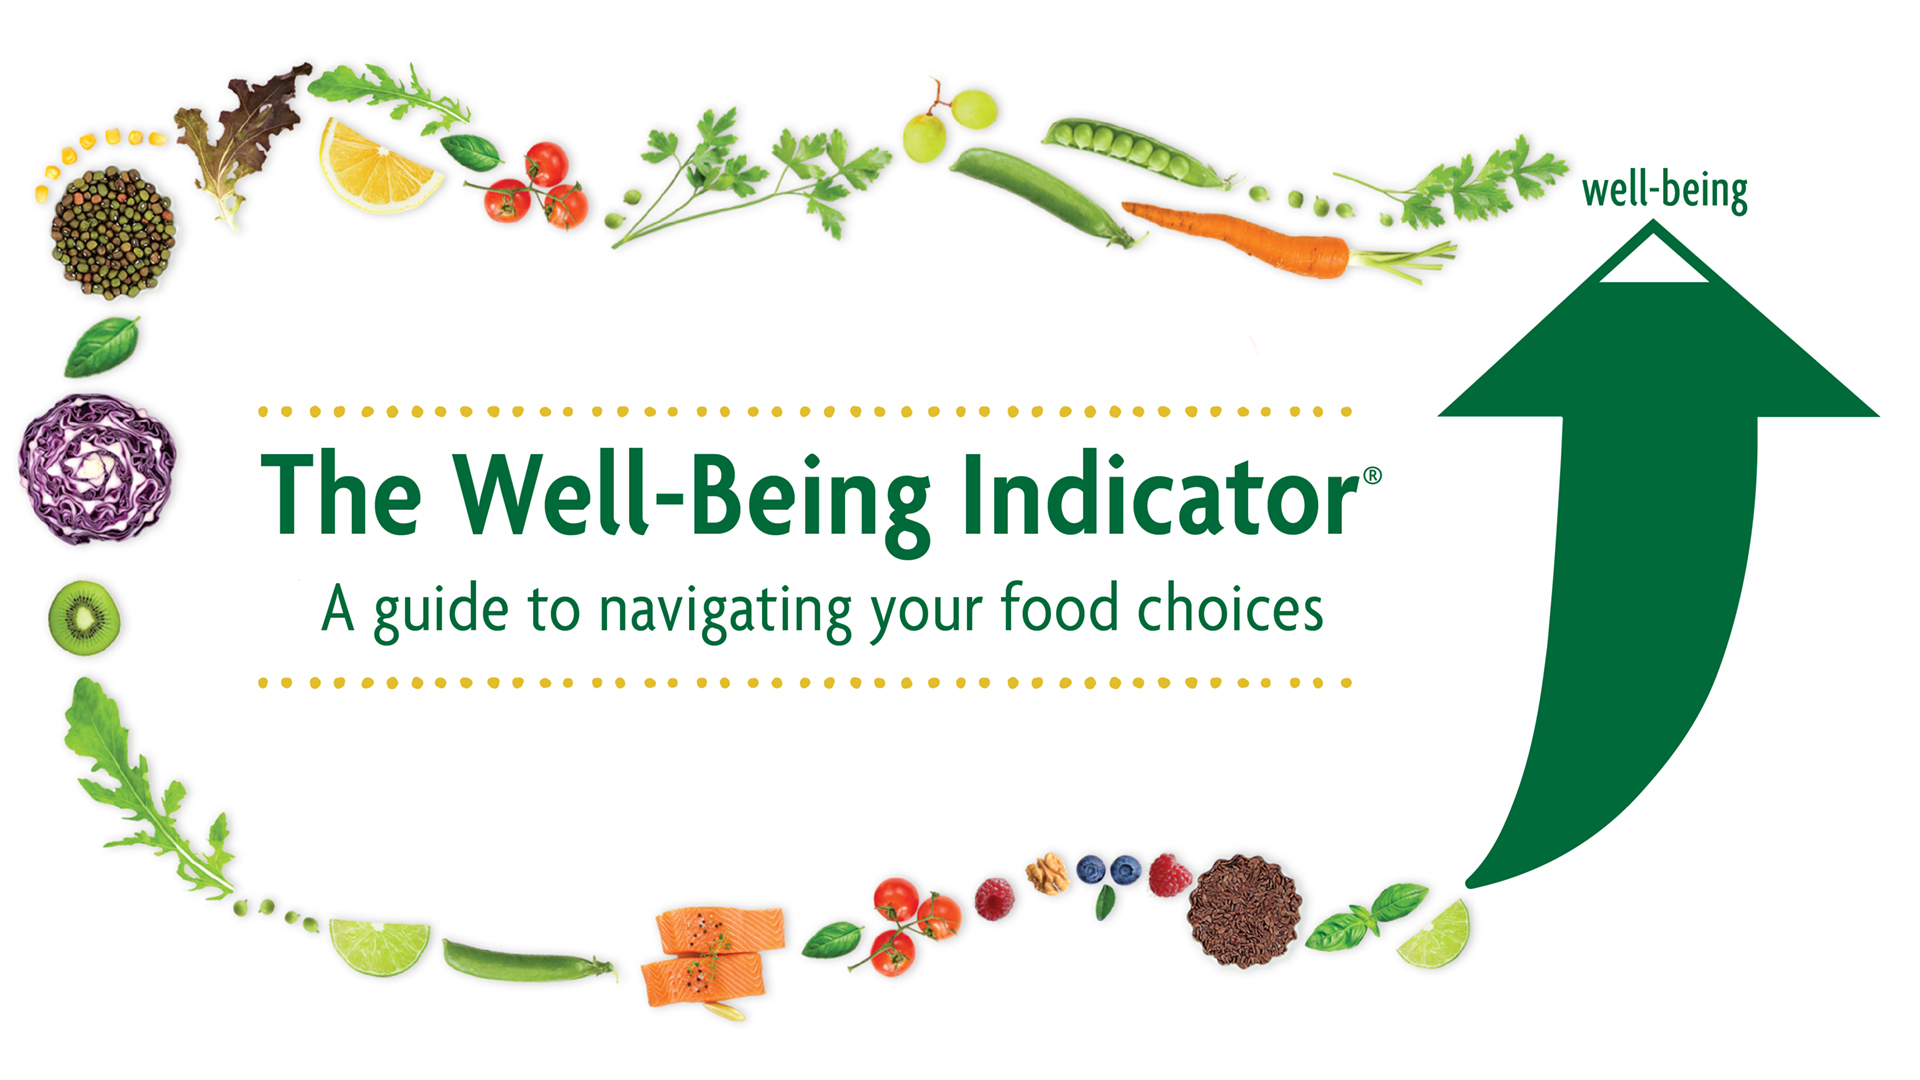 The Well-Being Indicator - A guide to navigating your food choices